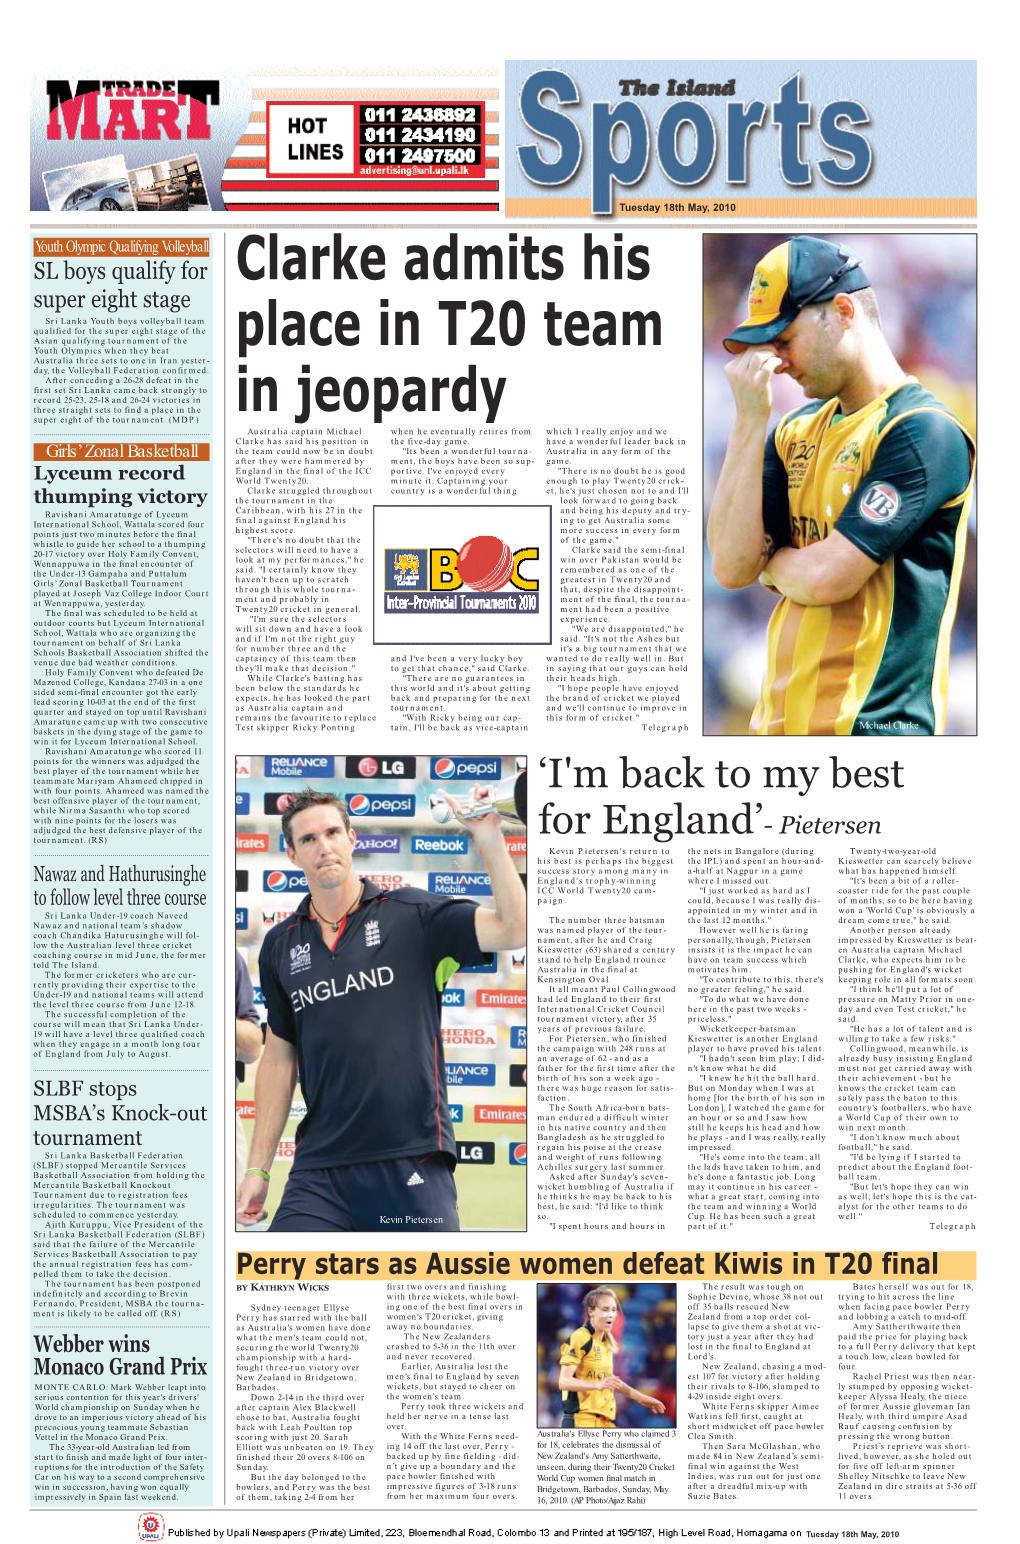 Clarke Admits His Place in T20 Team in Jeopardy